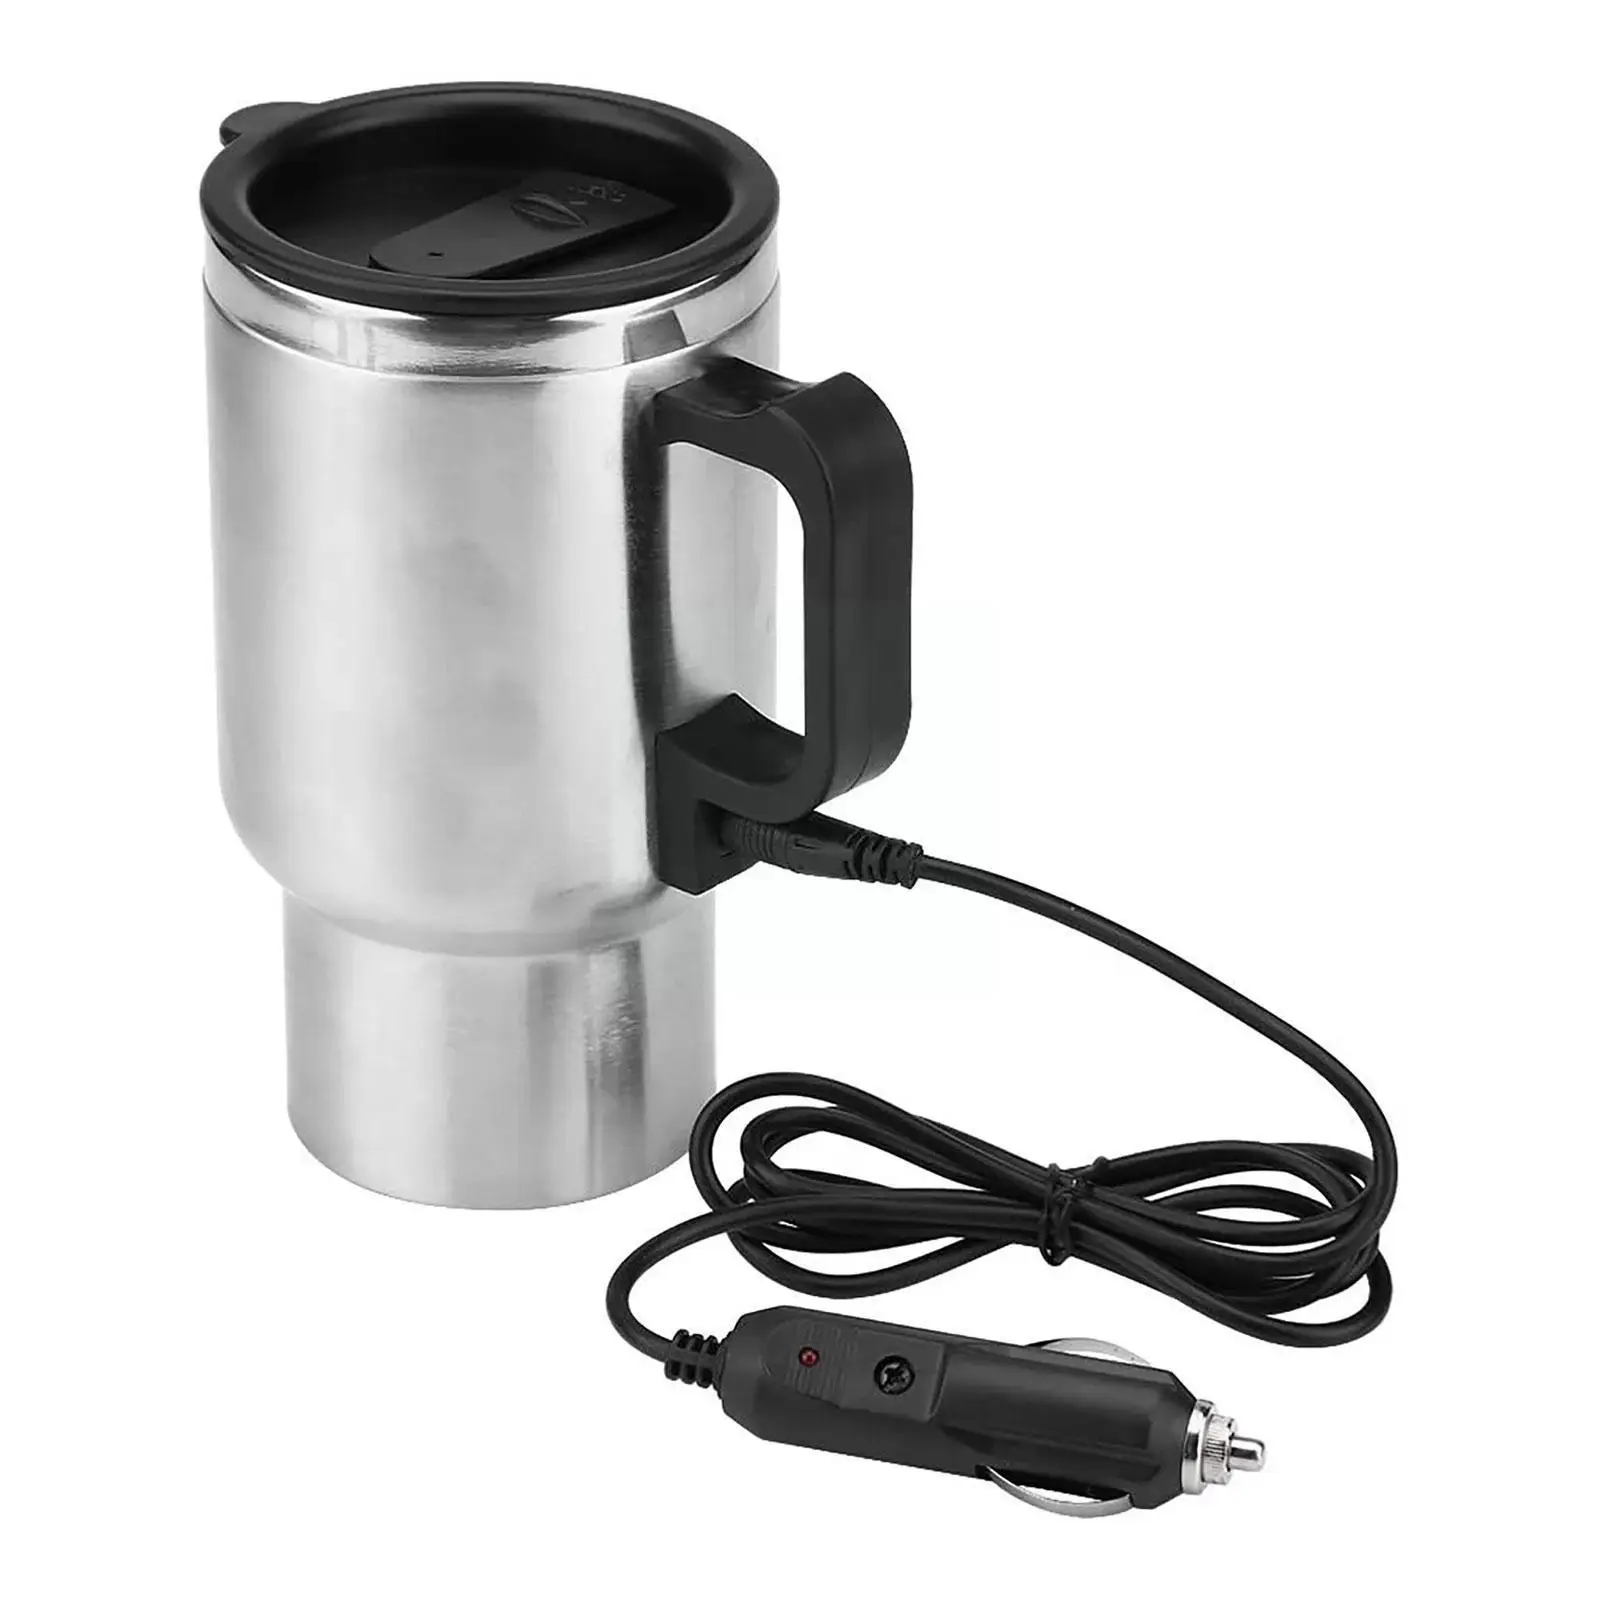 450ML 12V Car Heating Cup USB Heating Bottle Drink Cable Travel Electric... - $19.06